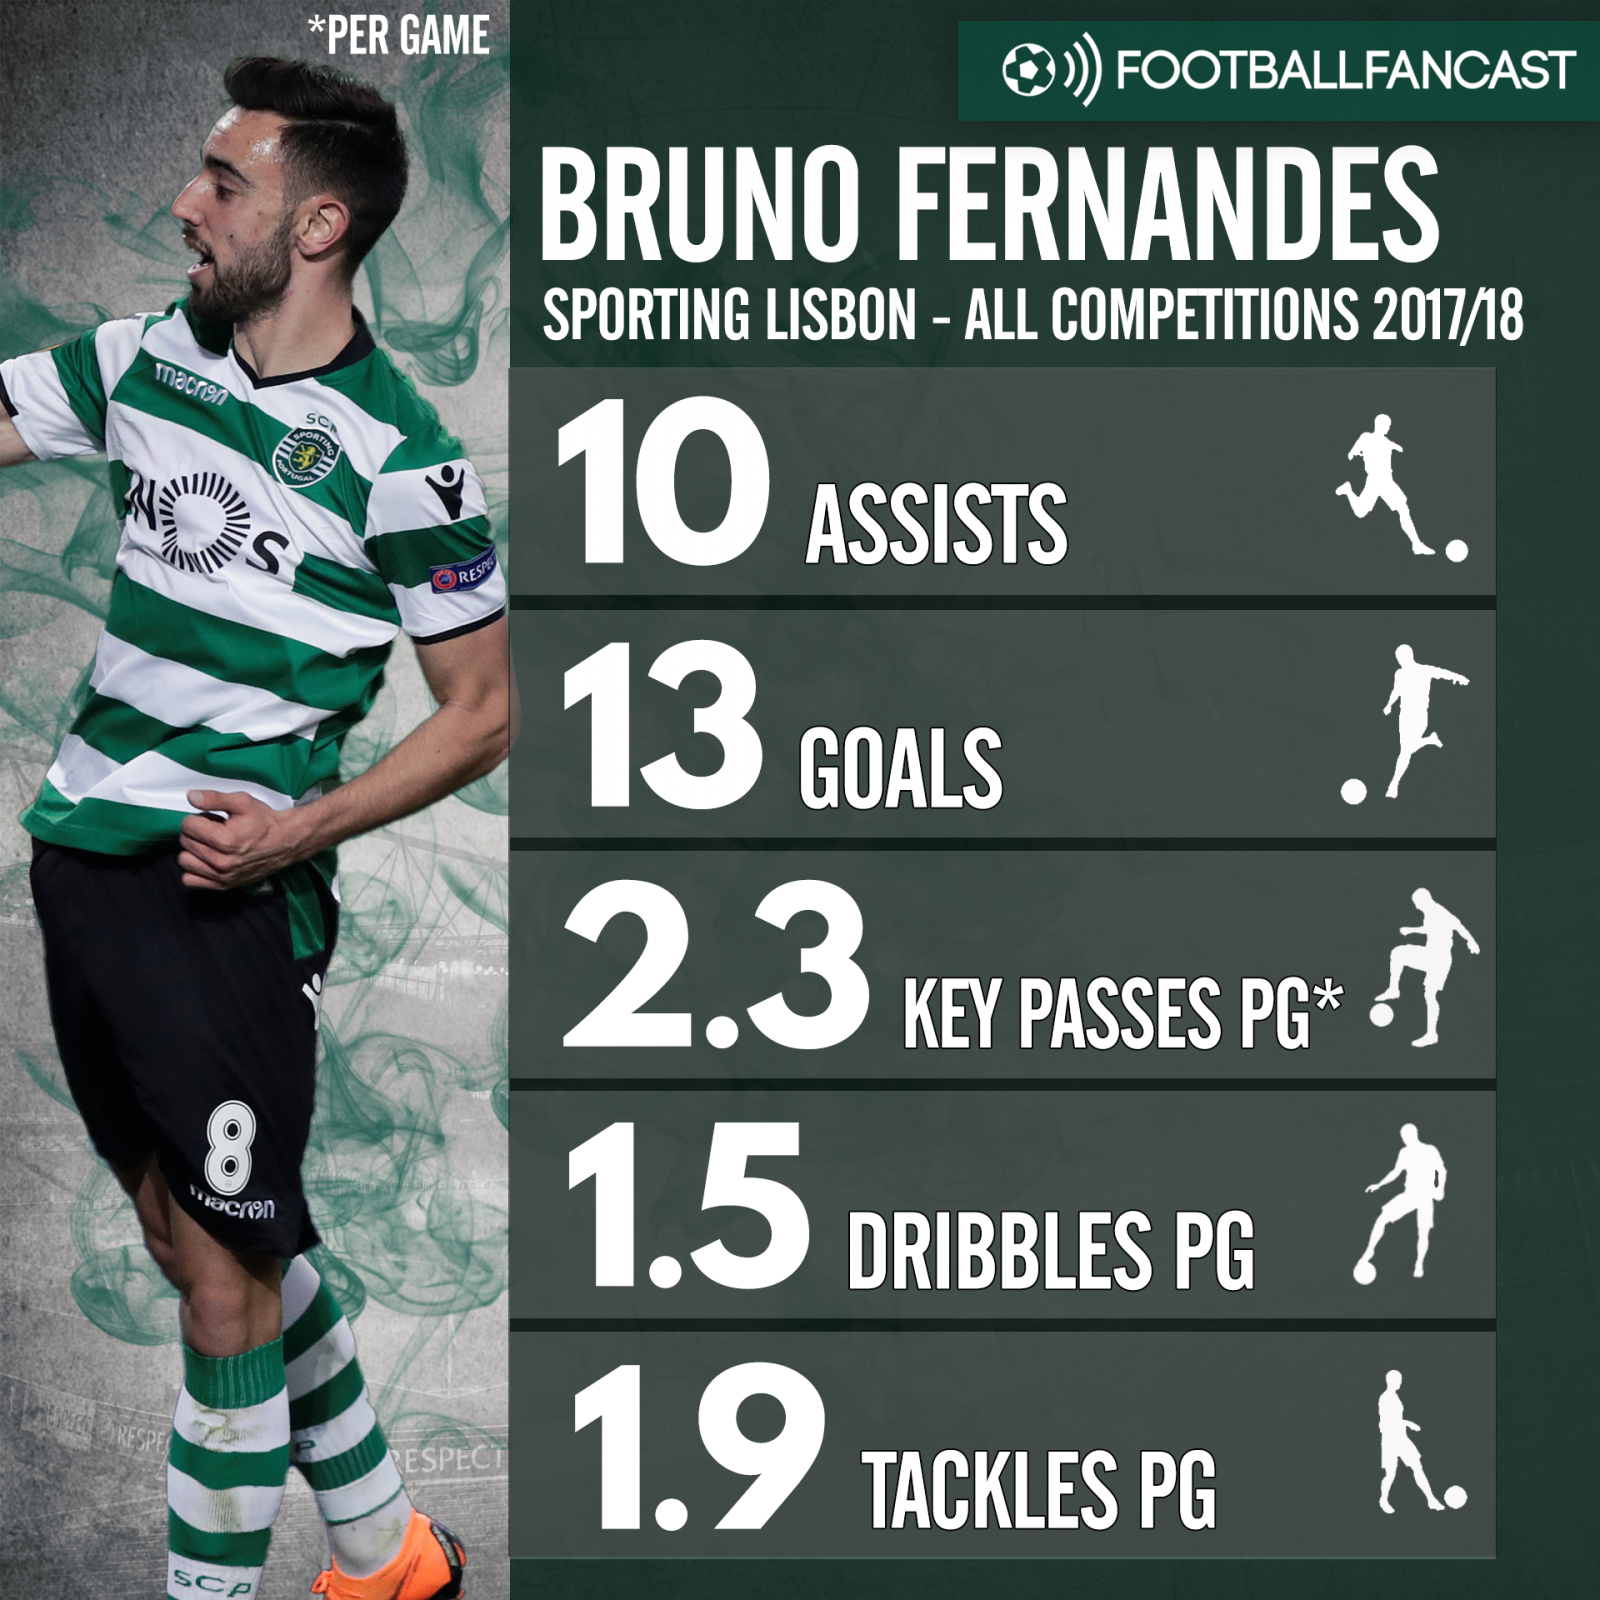 Bruno Fernandes' stats for Sporting this season